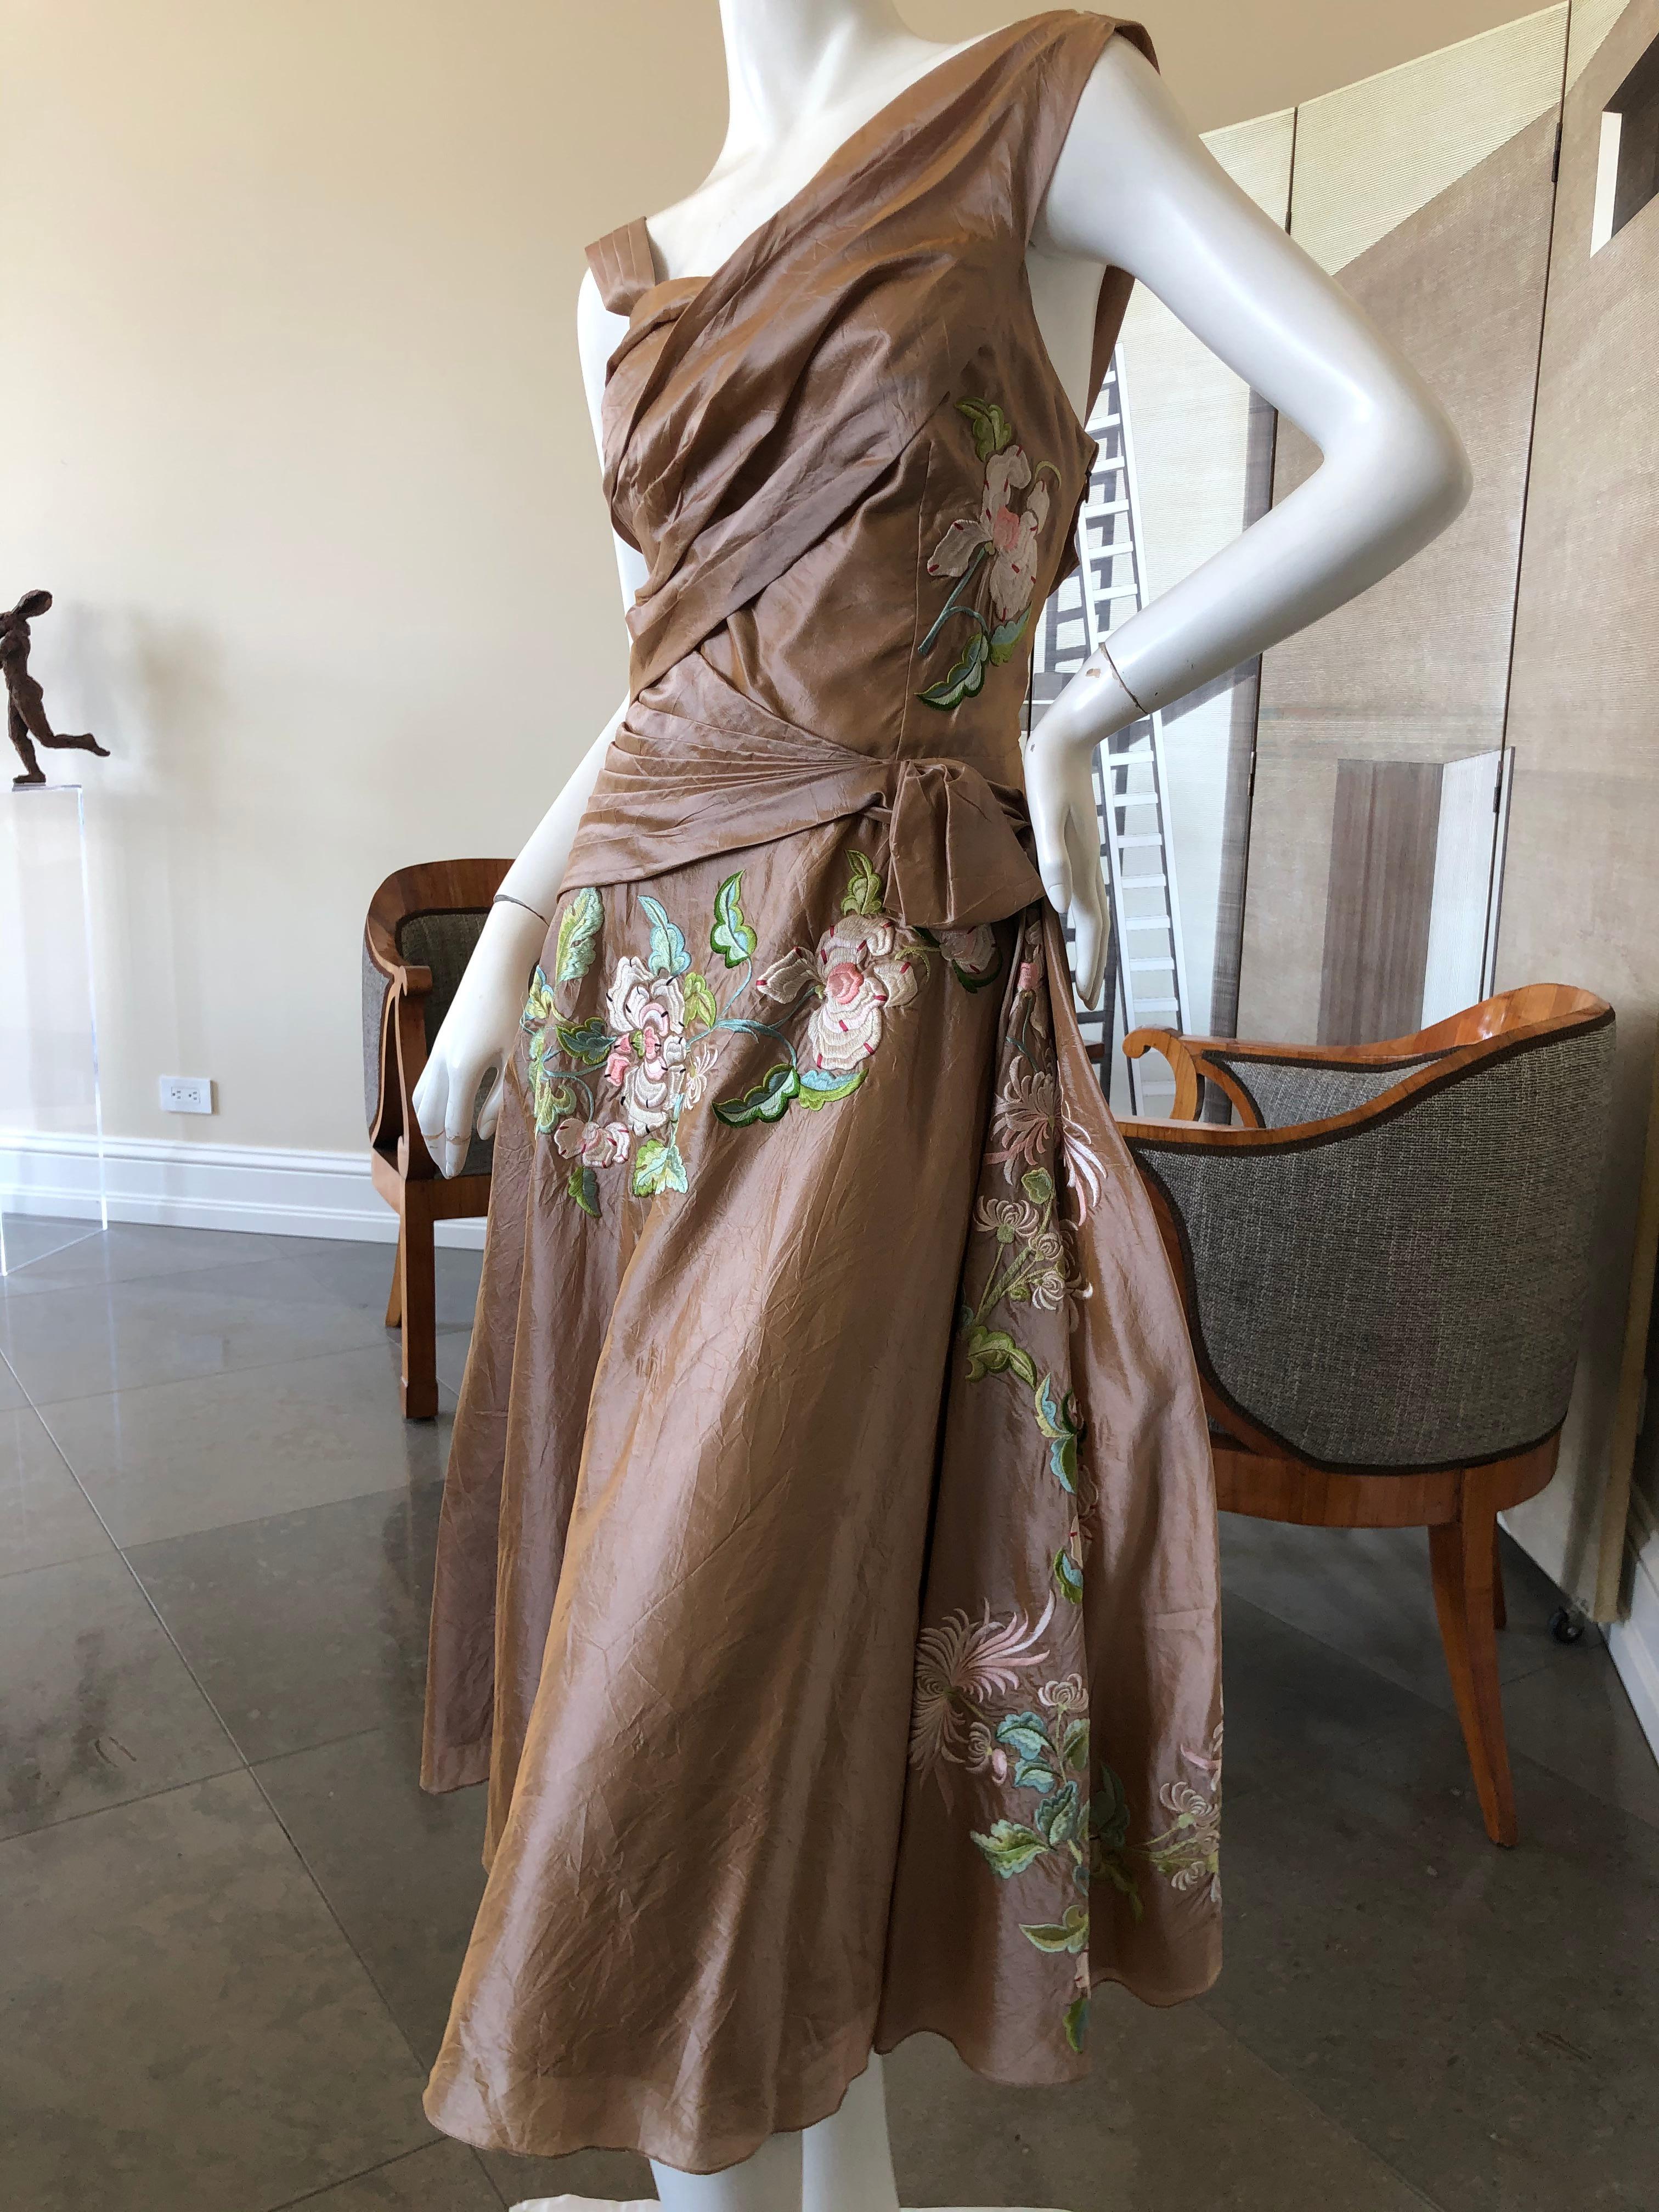 Christian Dior by John Galliano Floral Embroidered Silk Dress with Side Sash 4